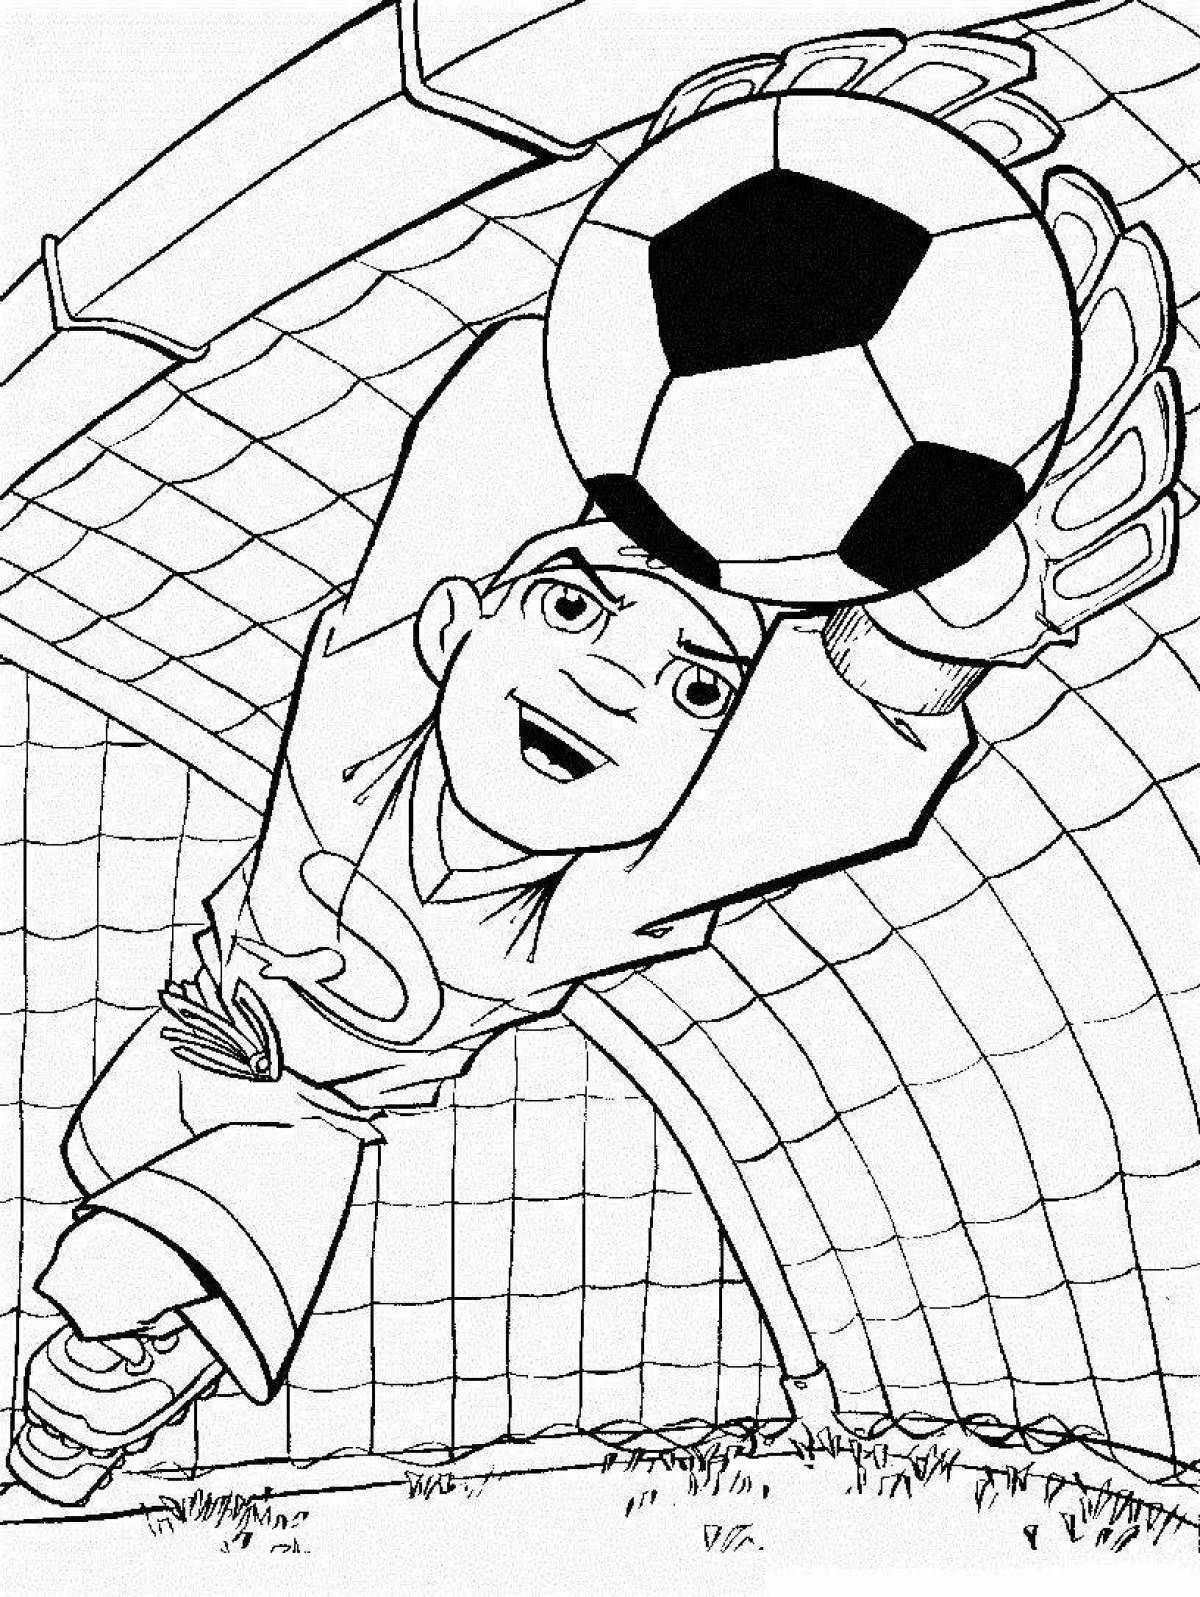 Colorful football coloring book